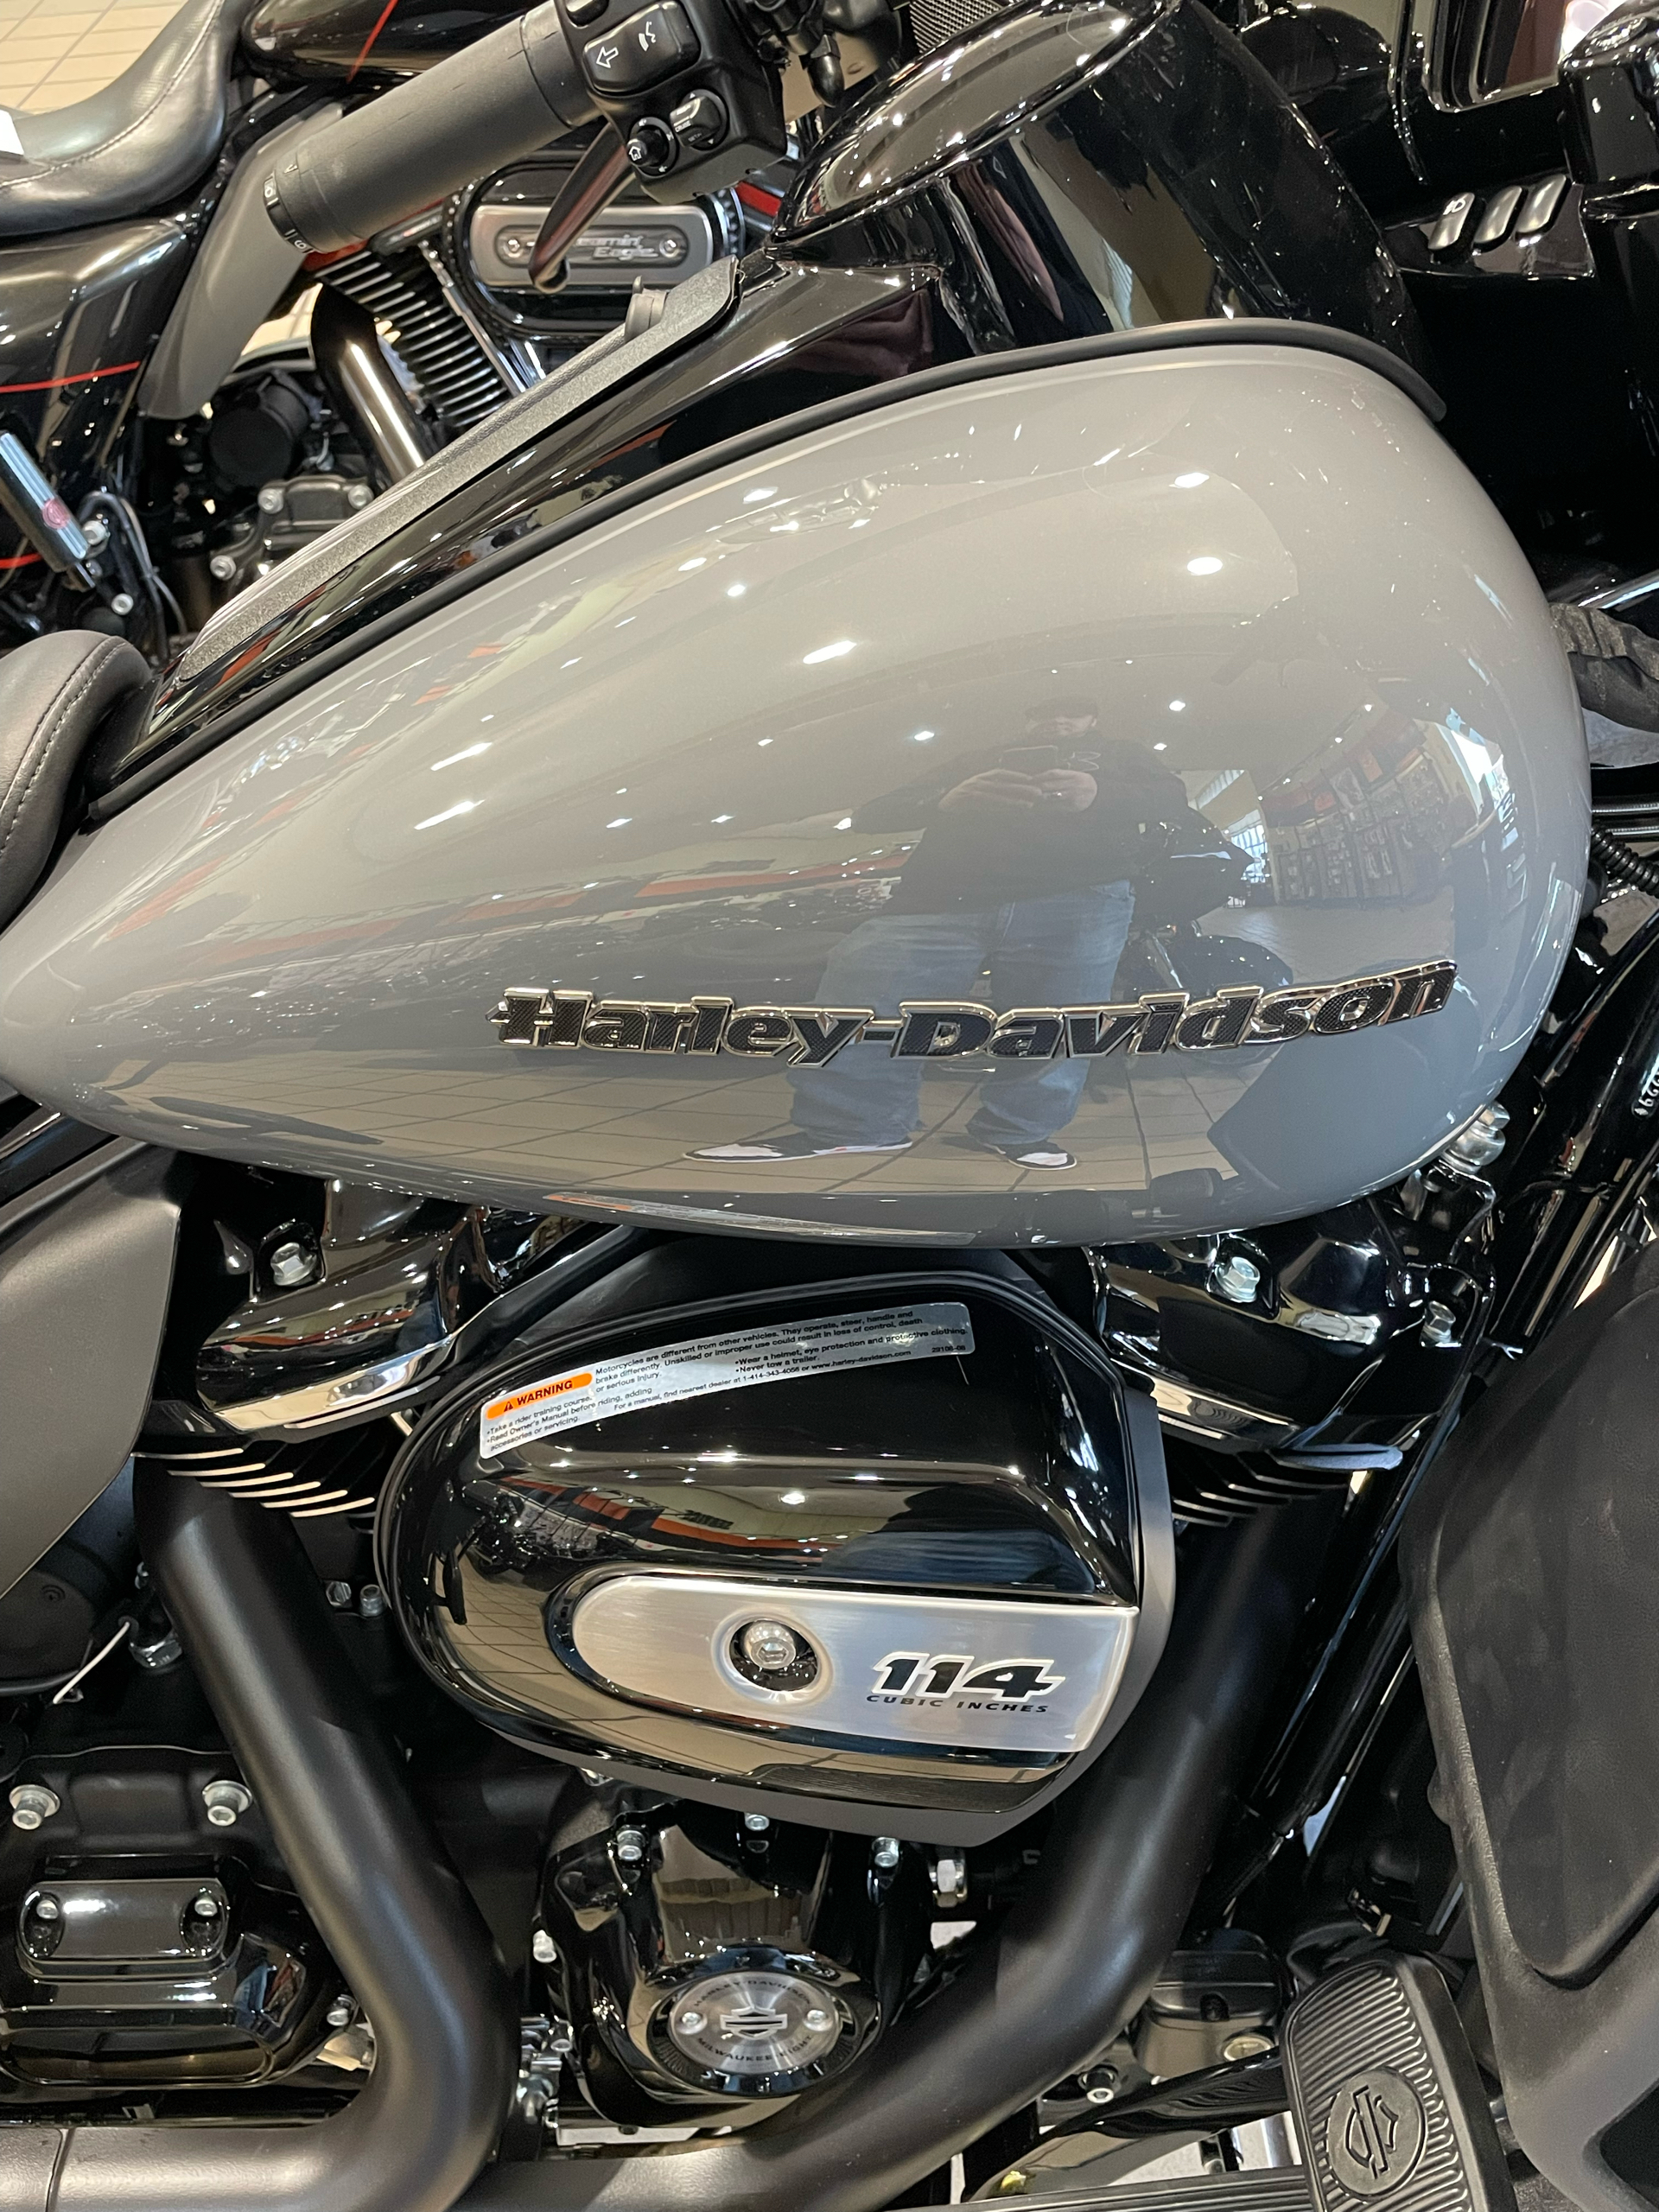 2022 Harley-Davidson Ultra Limited in Dumfries, Virginia - Photo 4